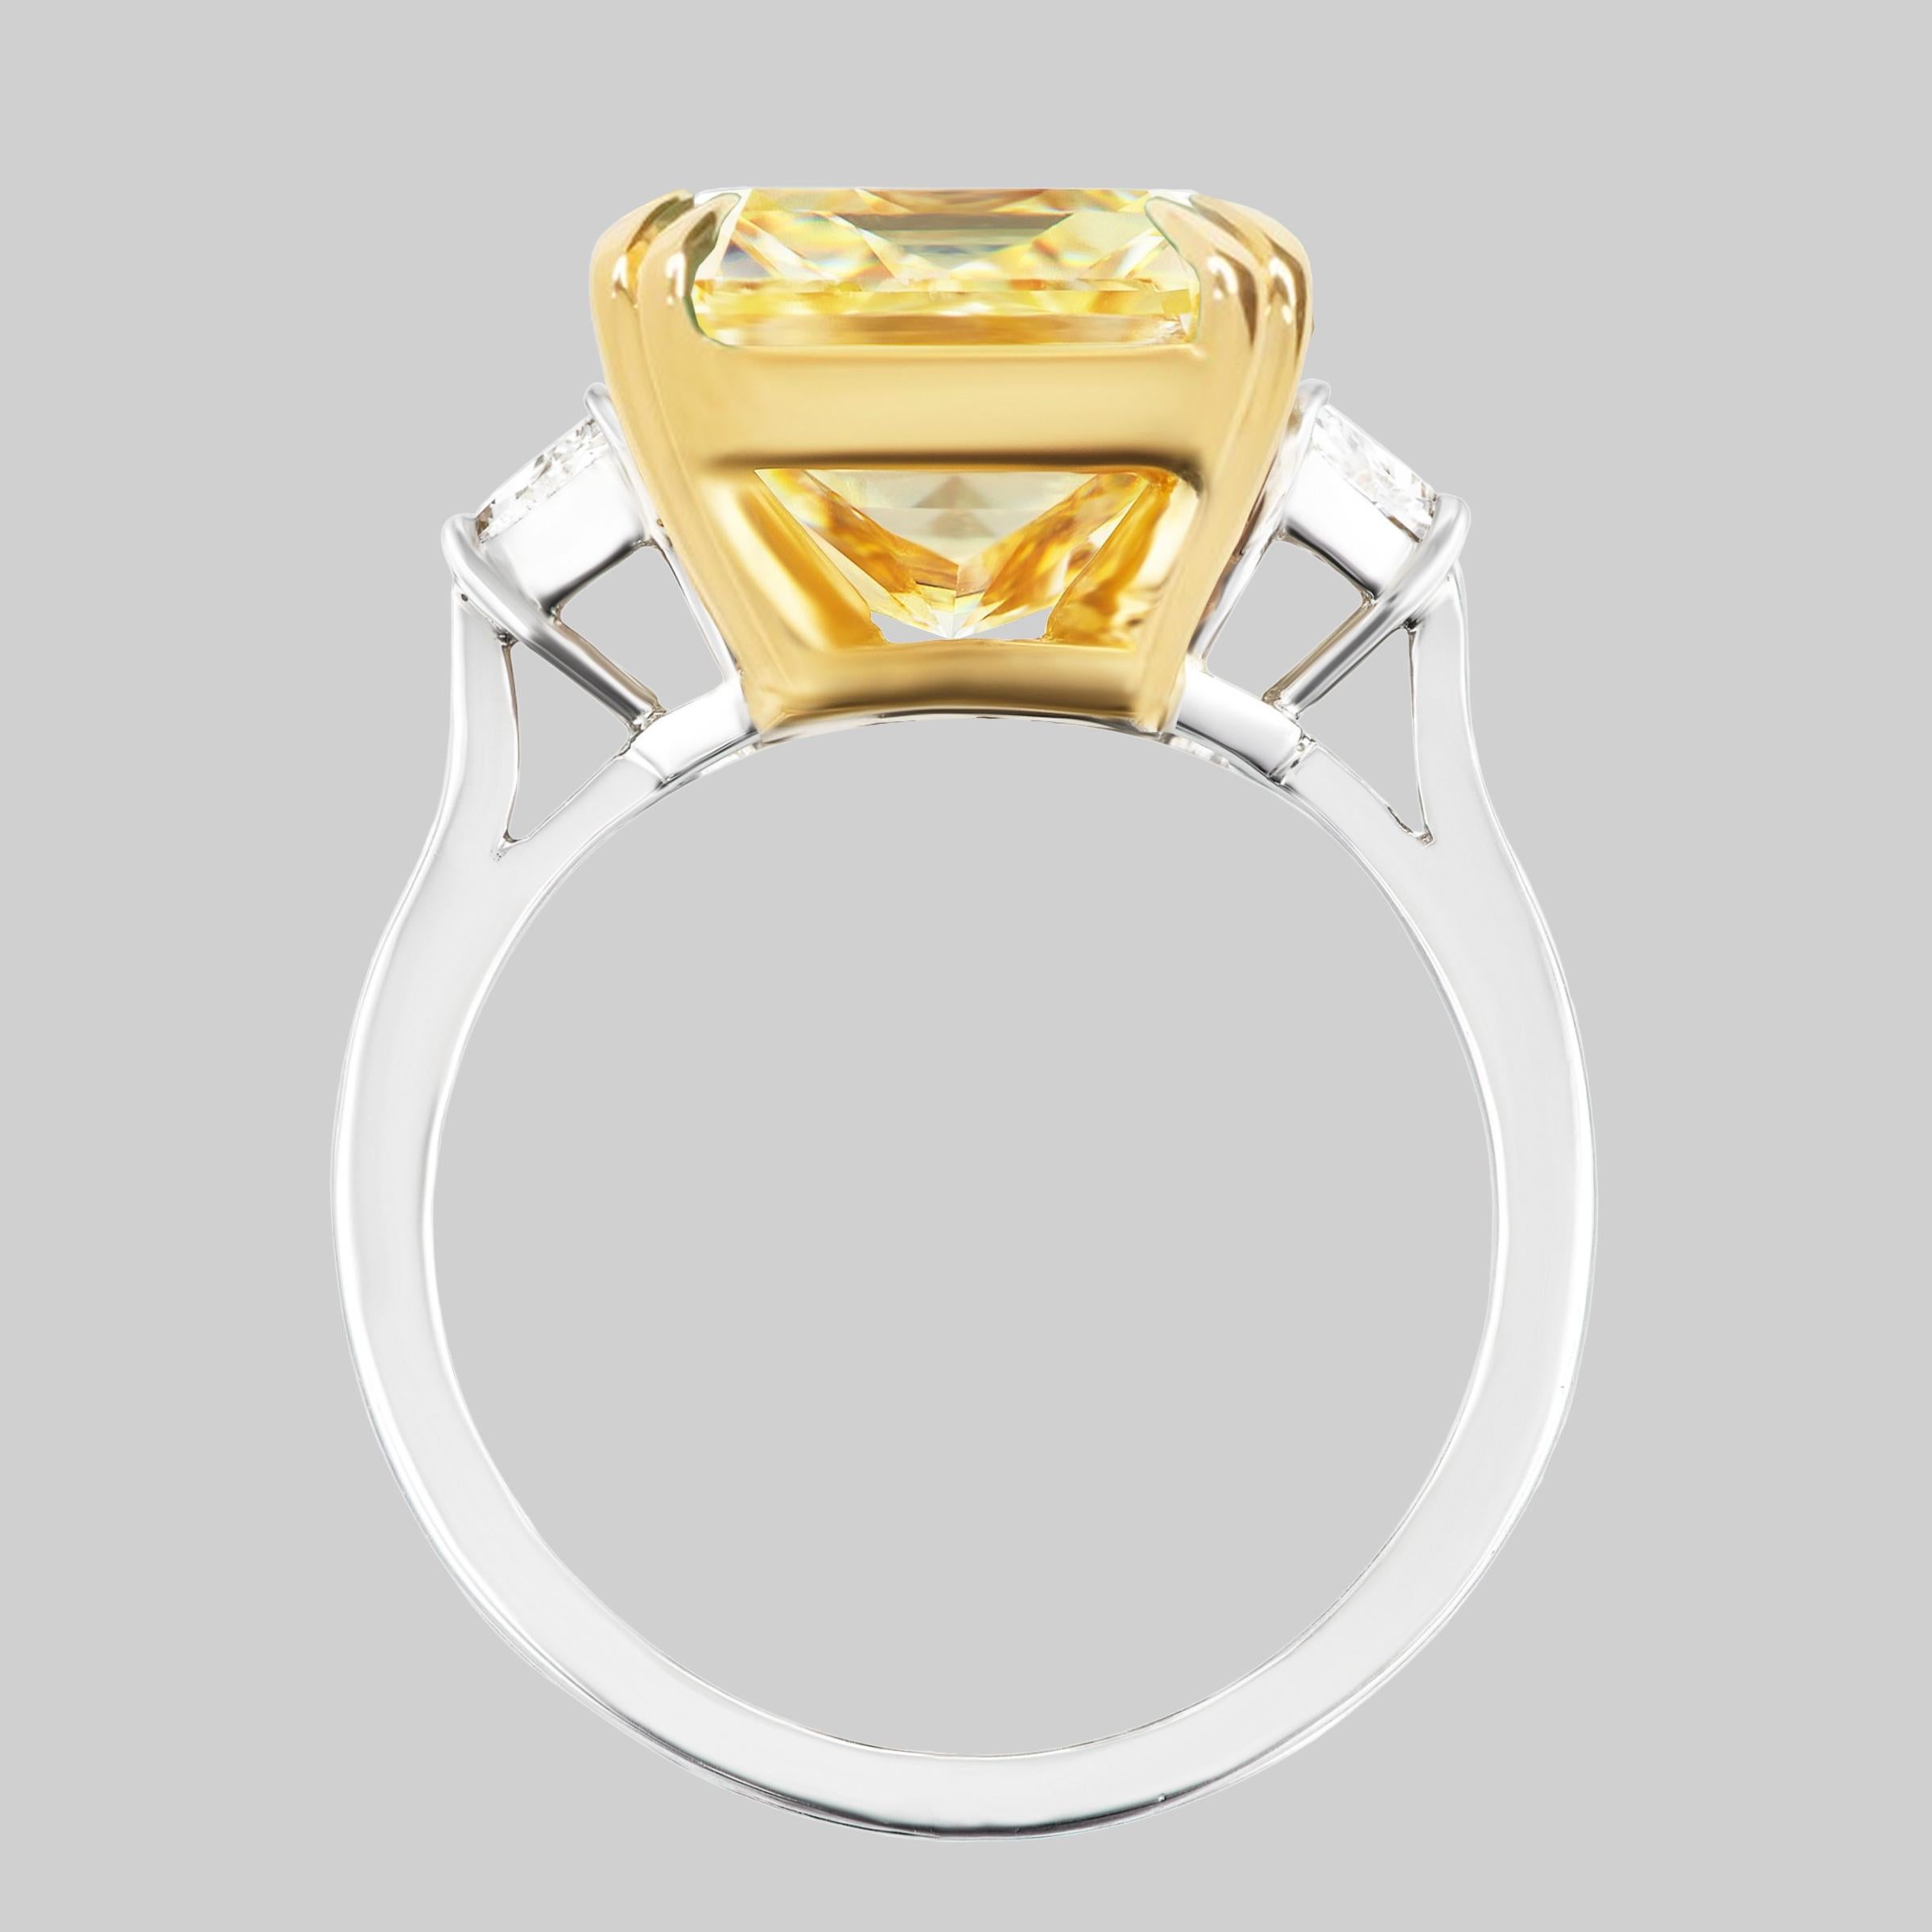 An exquisite long radiant cut diamond set in solid Platinum and 18K Yellow Gold Fancy yellow Three stone diamond ring, the center stone is Canary yellow diamond, weighing 5 Carats Fancy Yellow VVS in Clarity, Certified by GIA, Radiant Cut.
Set with